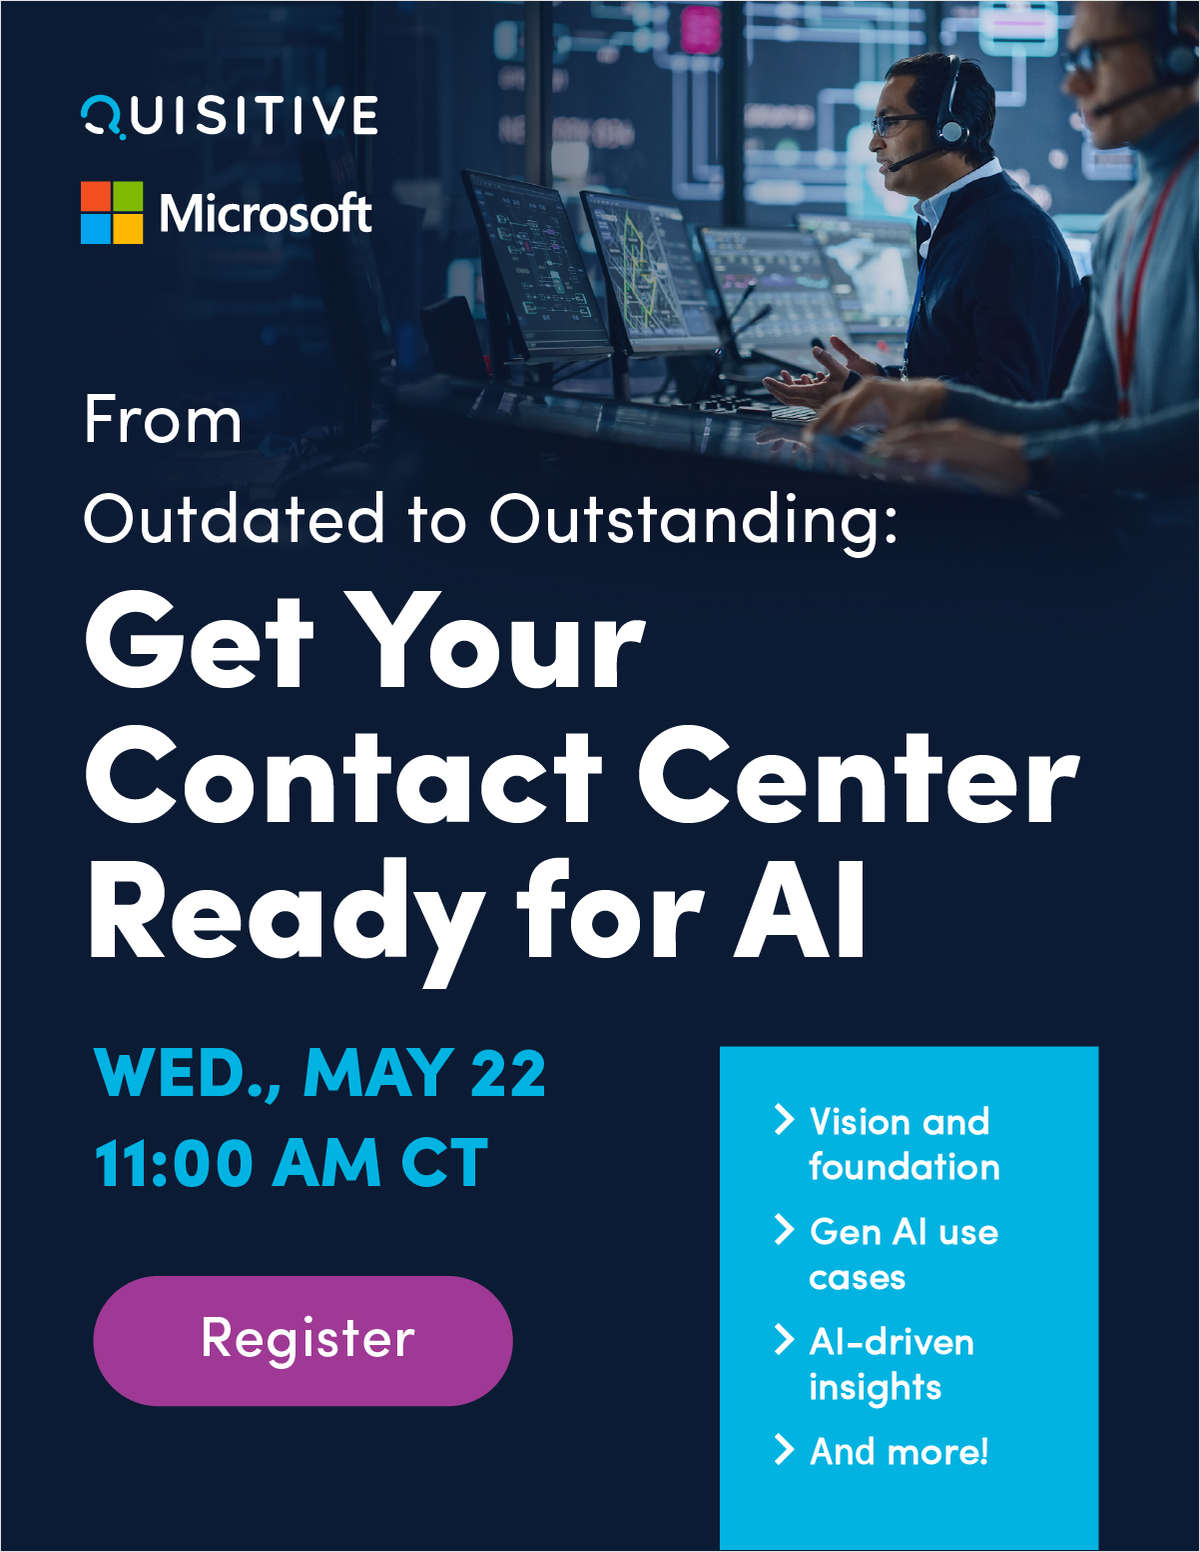 From Outdated to Outstanding: Get Your Contact Center Ready for AI